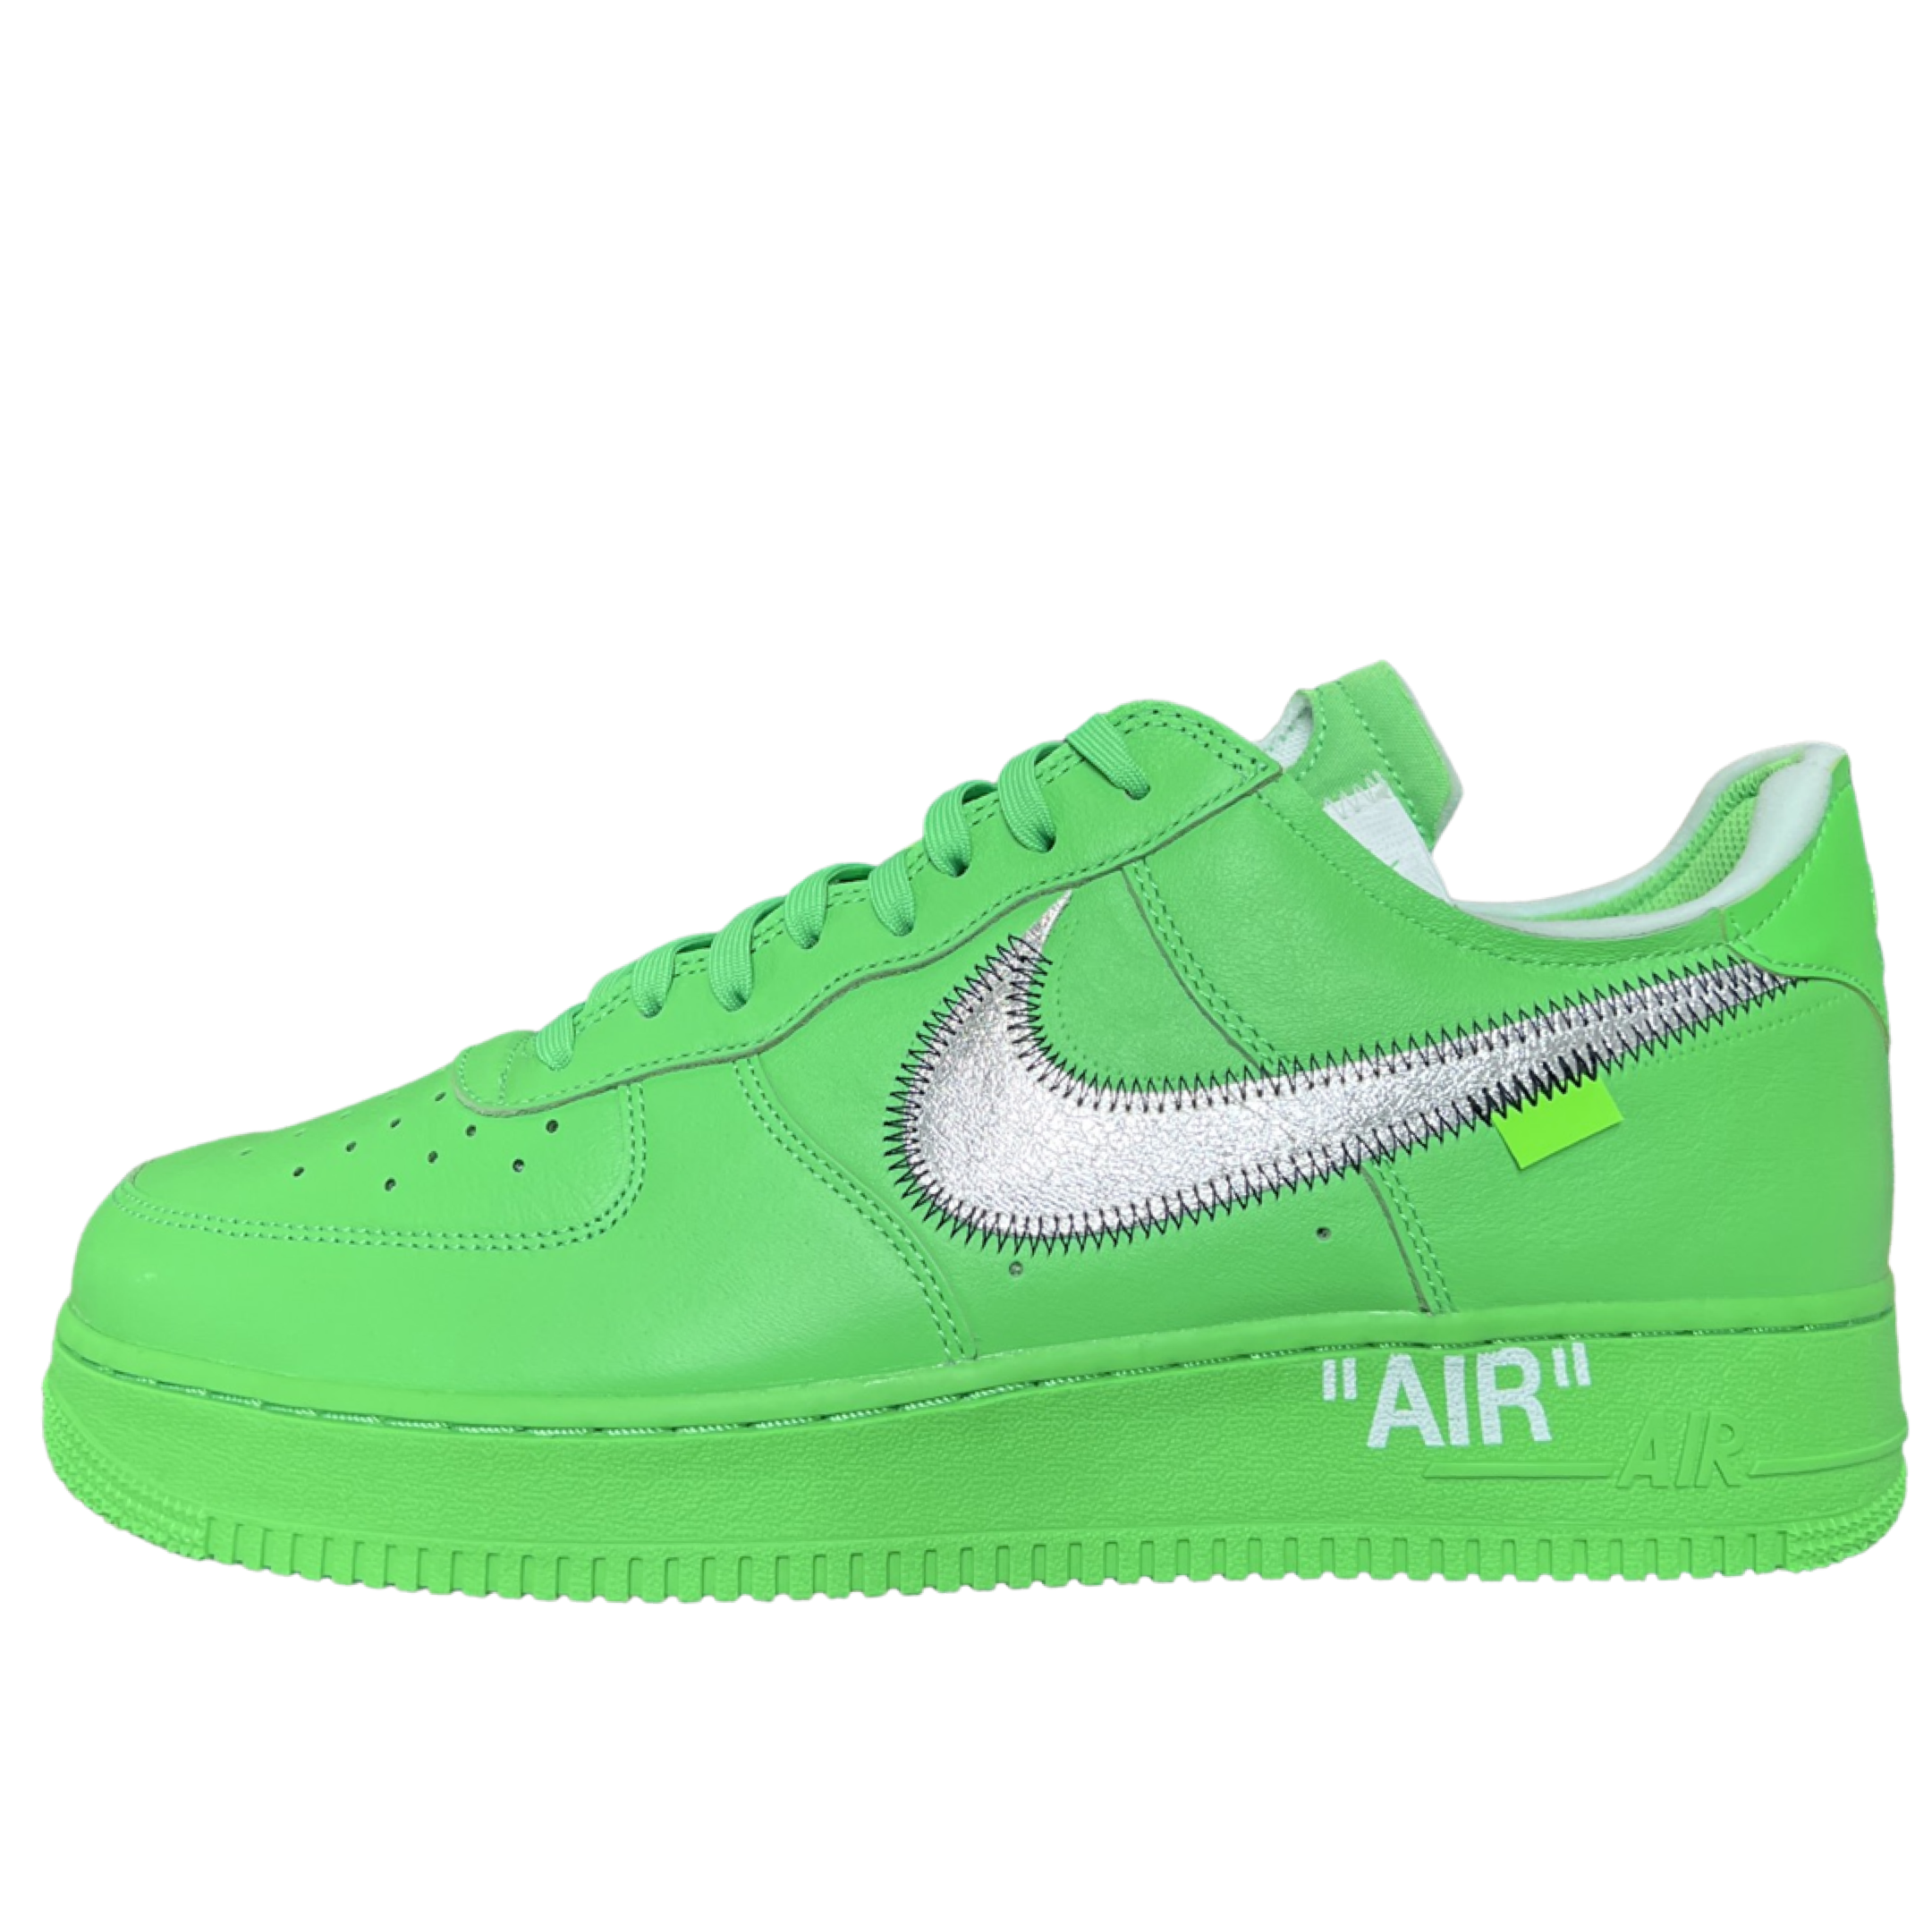 Nike Air Force 1 Low Off-White Brooklyn Style DX1419-300 Size 10.5